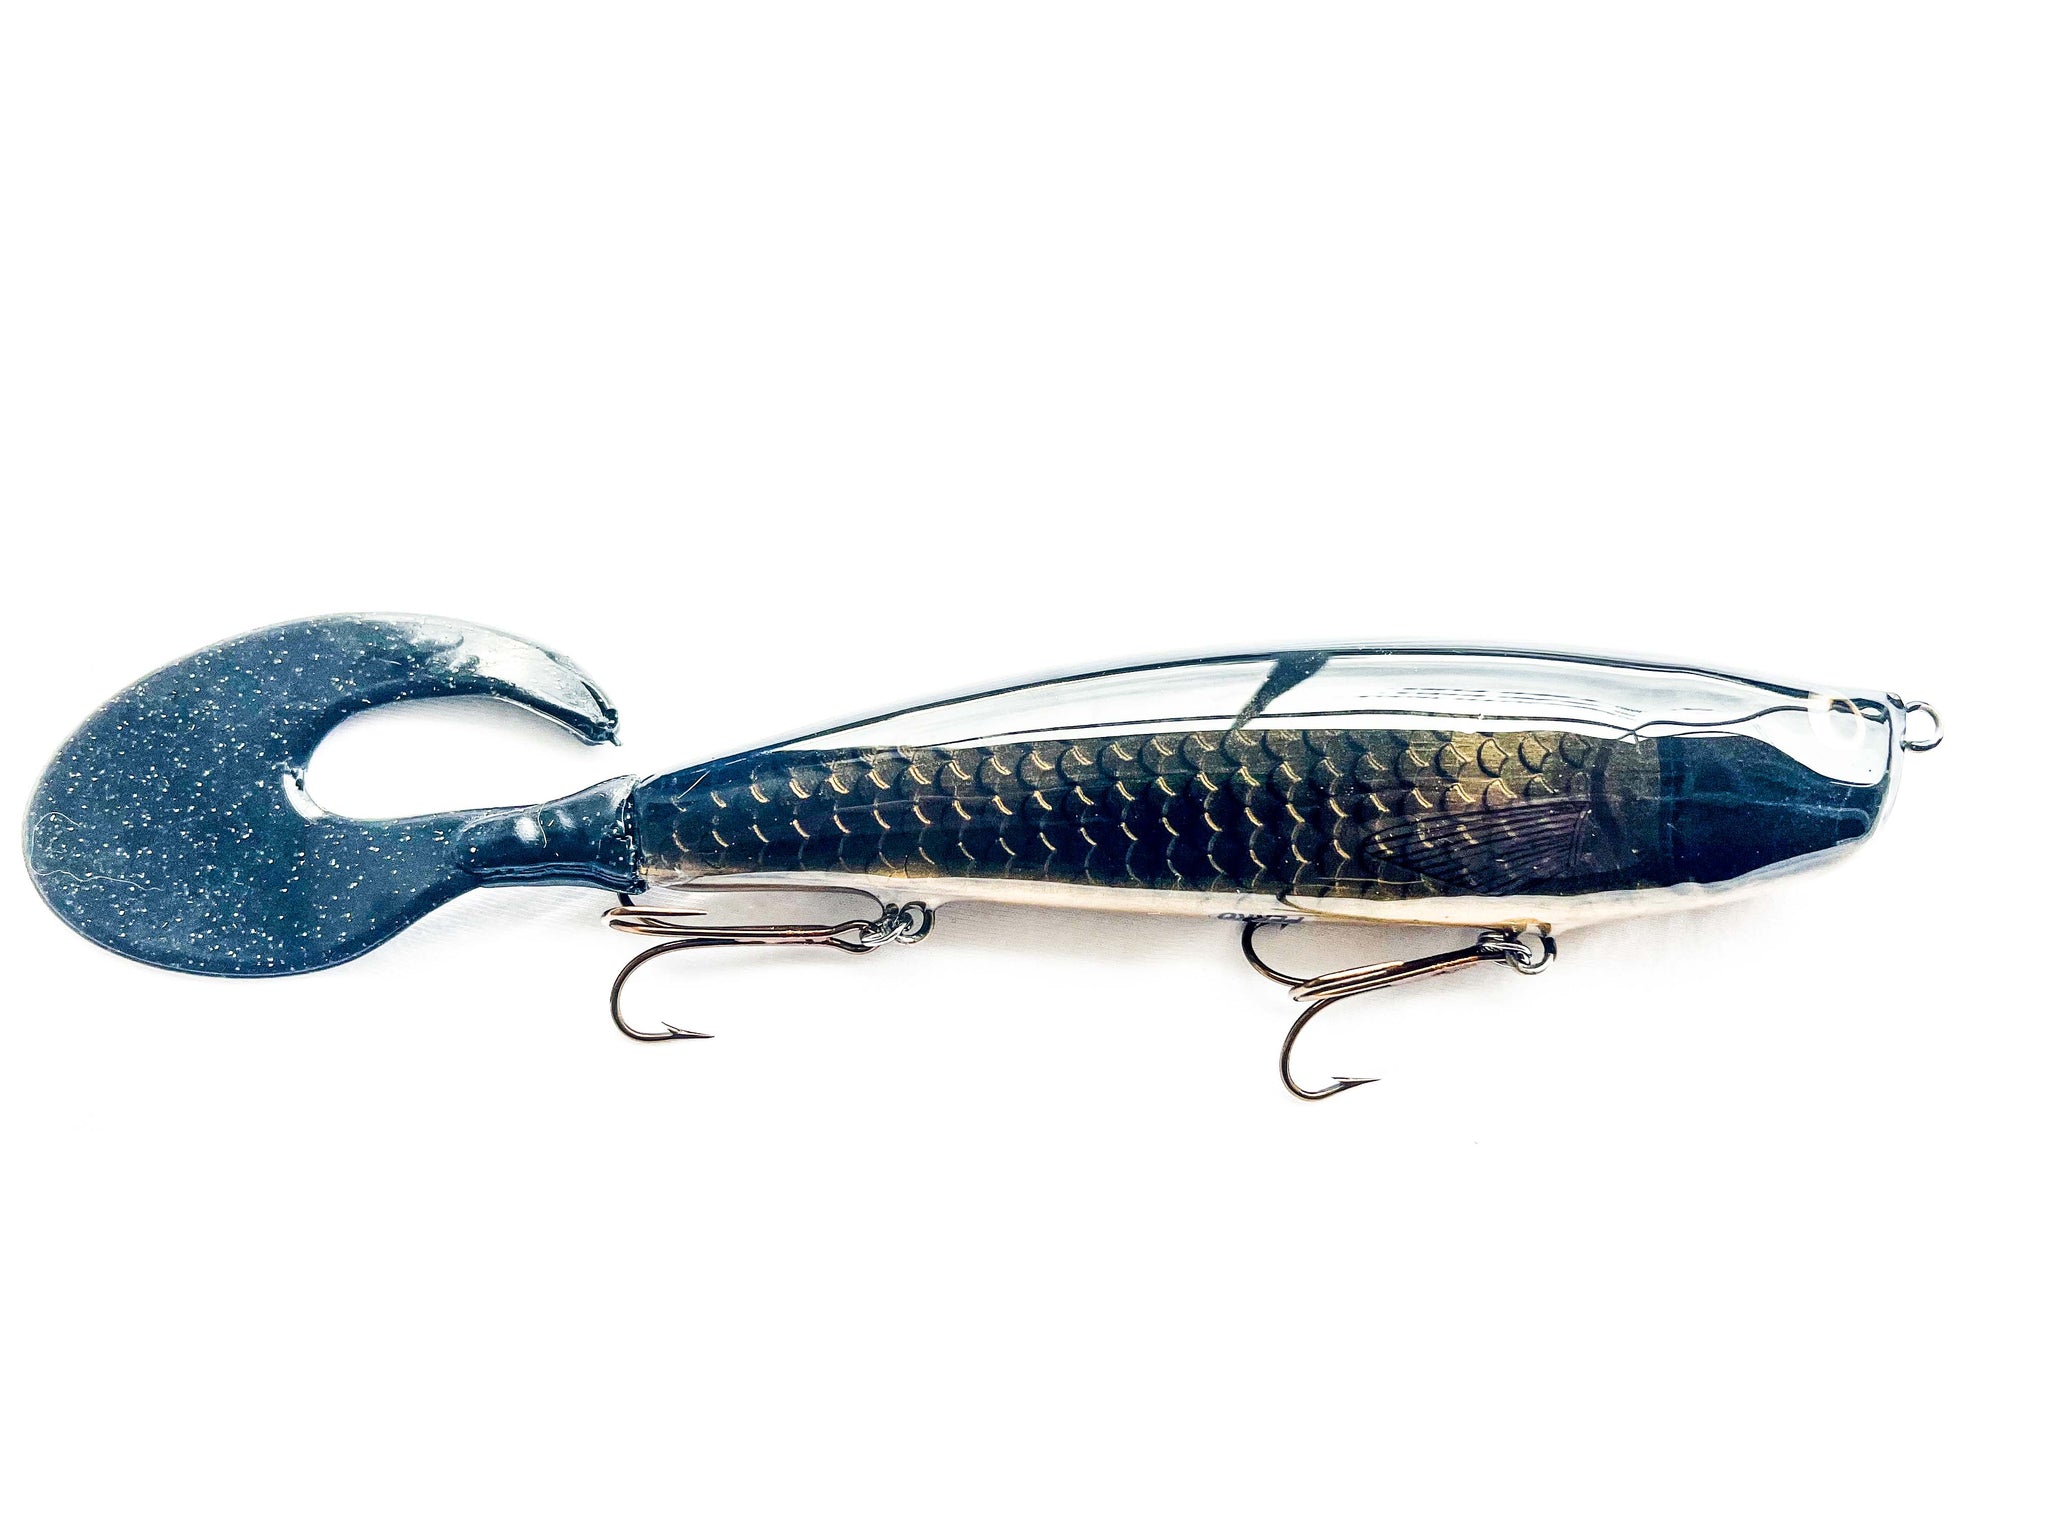 Take Lures and Assist hooks – Pirotta Fishing Centre